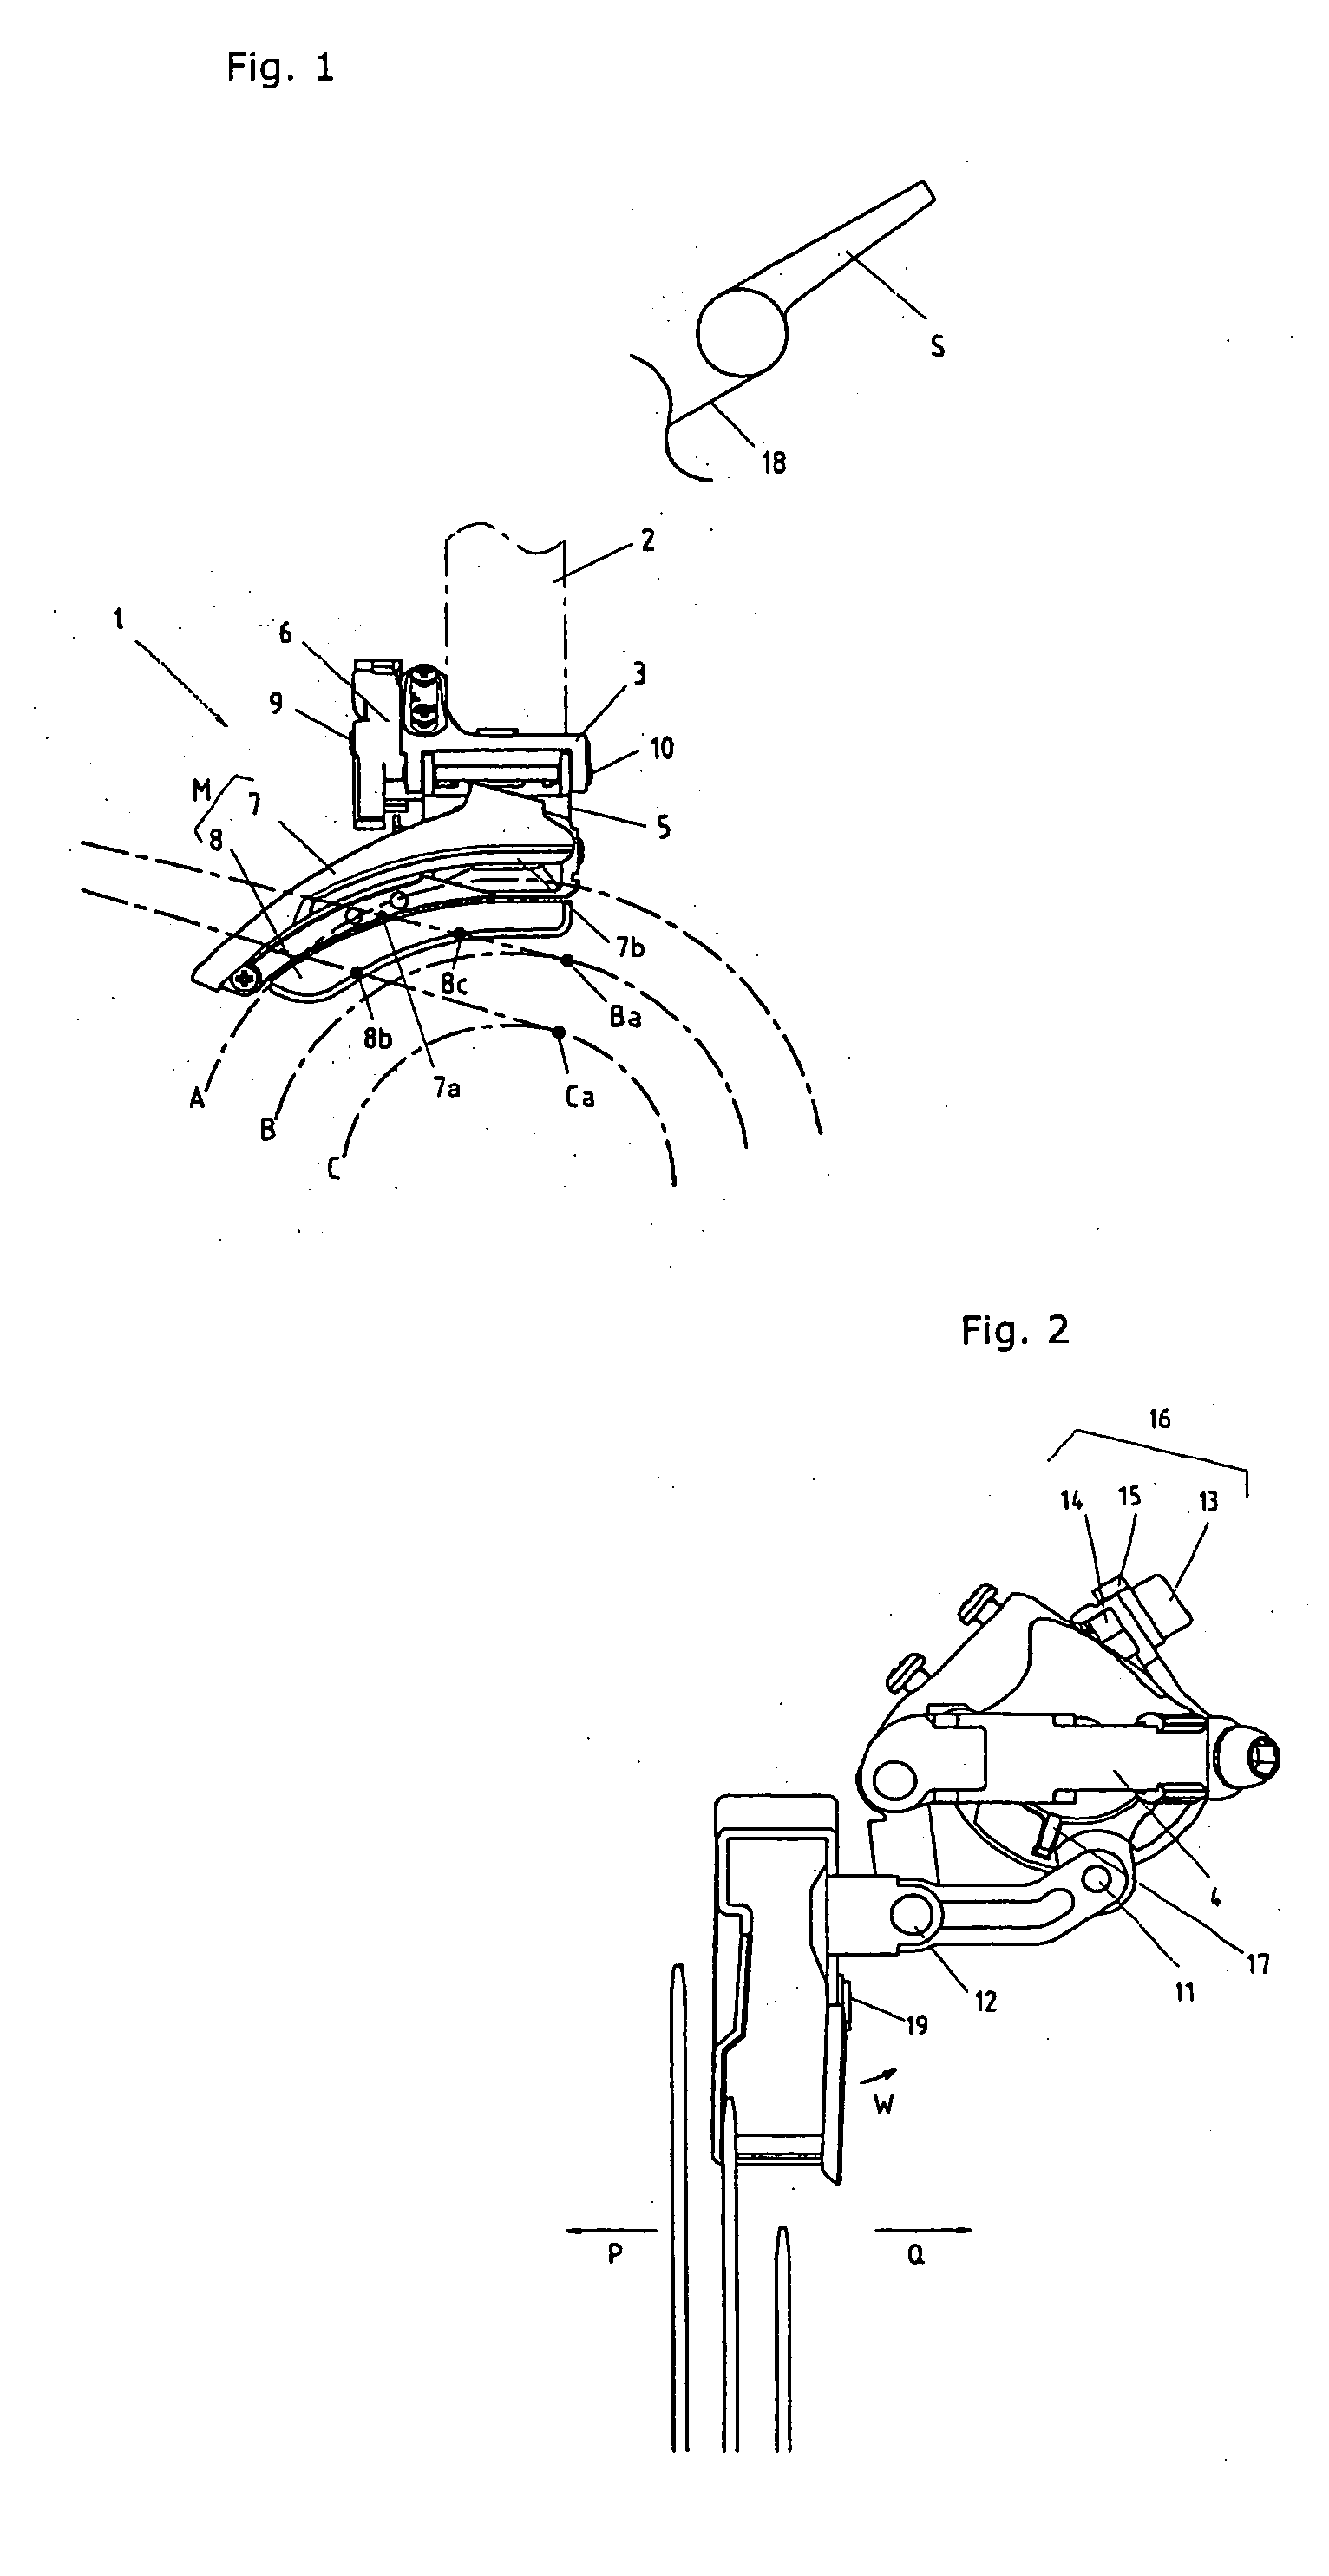 Transmission for bicycle